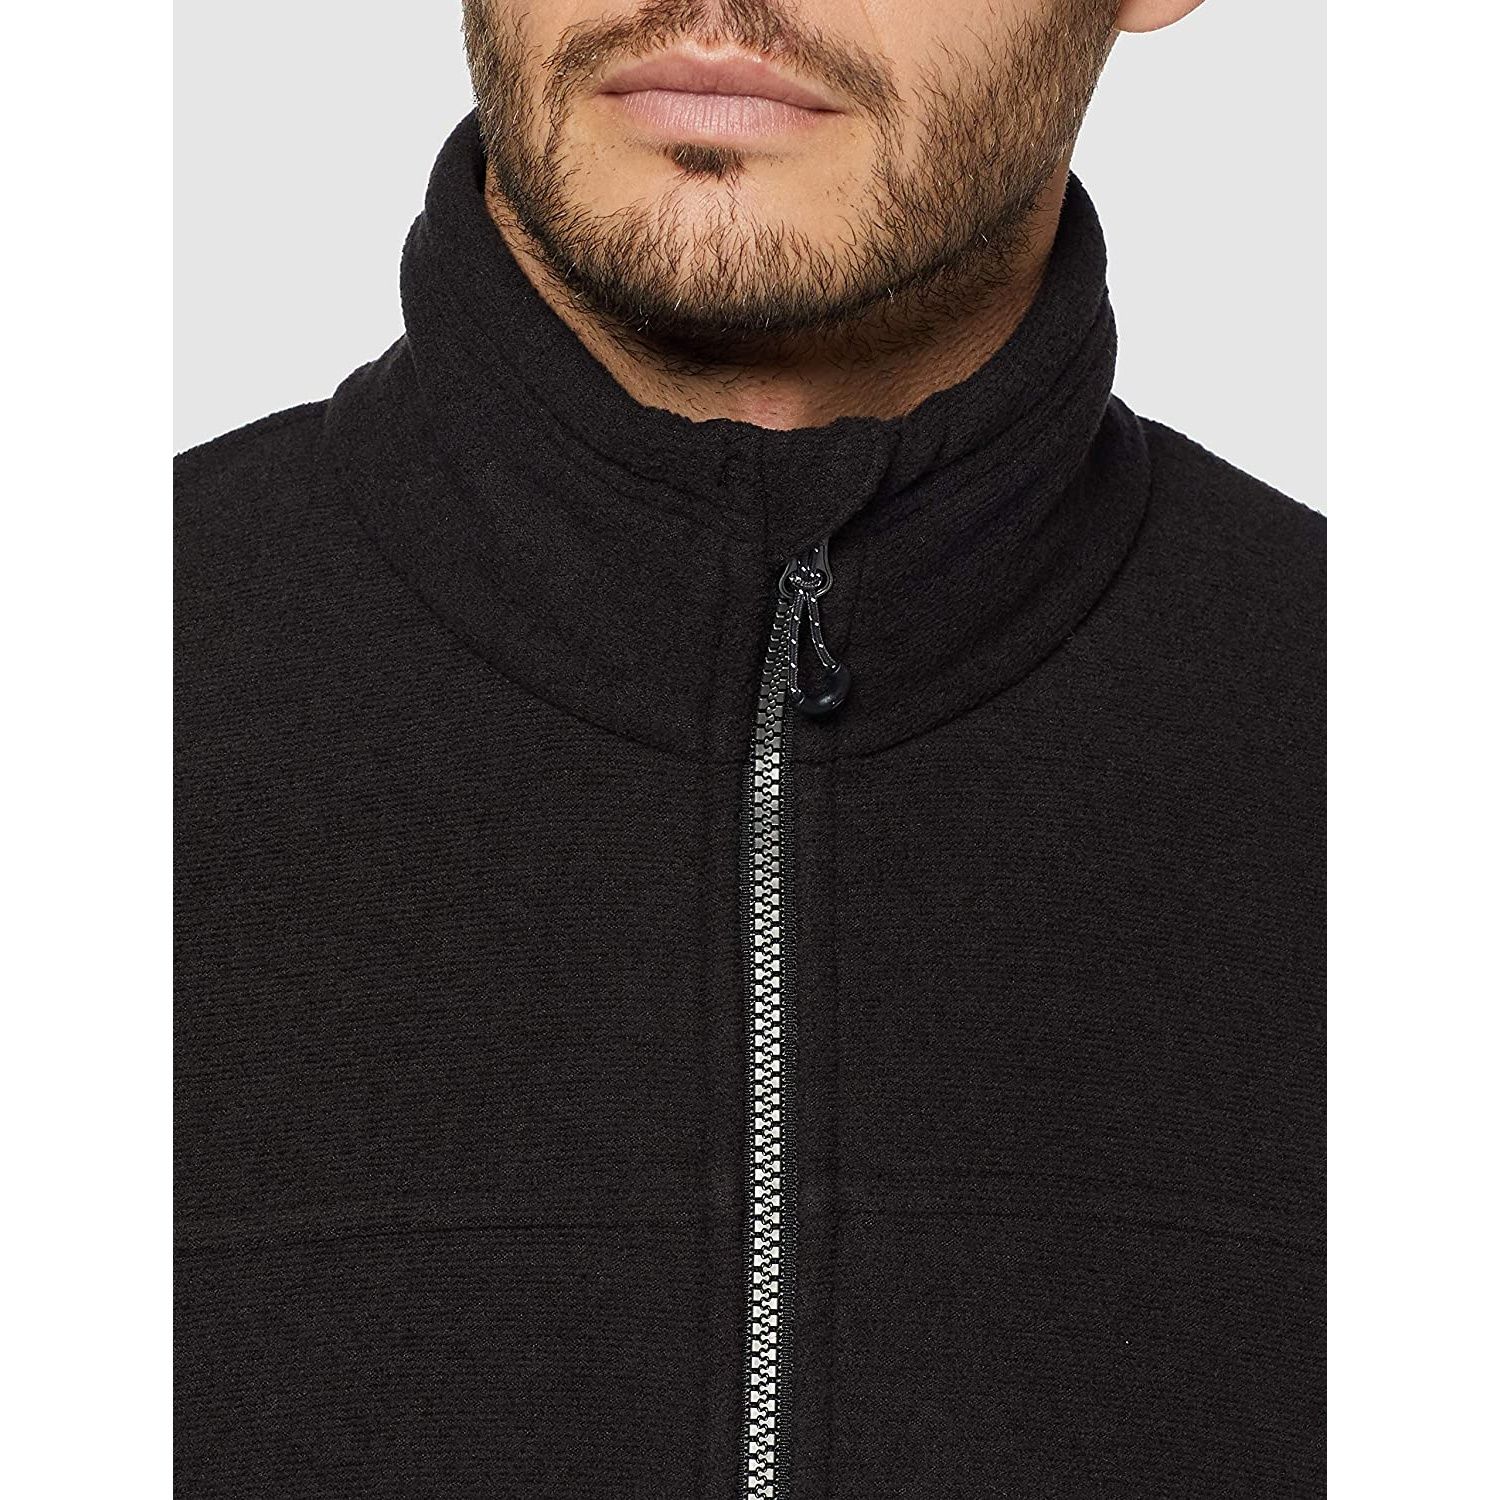 100% Polyester. The Parkline fleece offers the ultimate microlayer. The mens fleece is made with a smart lightweight fabric, providing a great layering option. The lightweight fleece offers a quick-drying function and features a stylish full-zip design and protective chin guard.